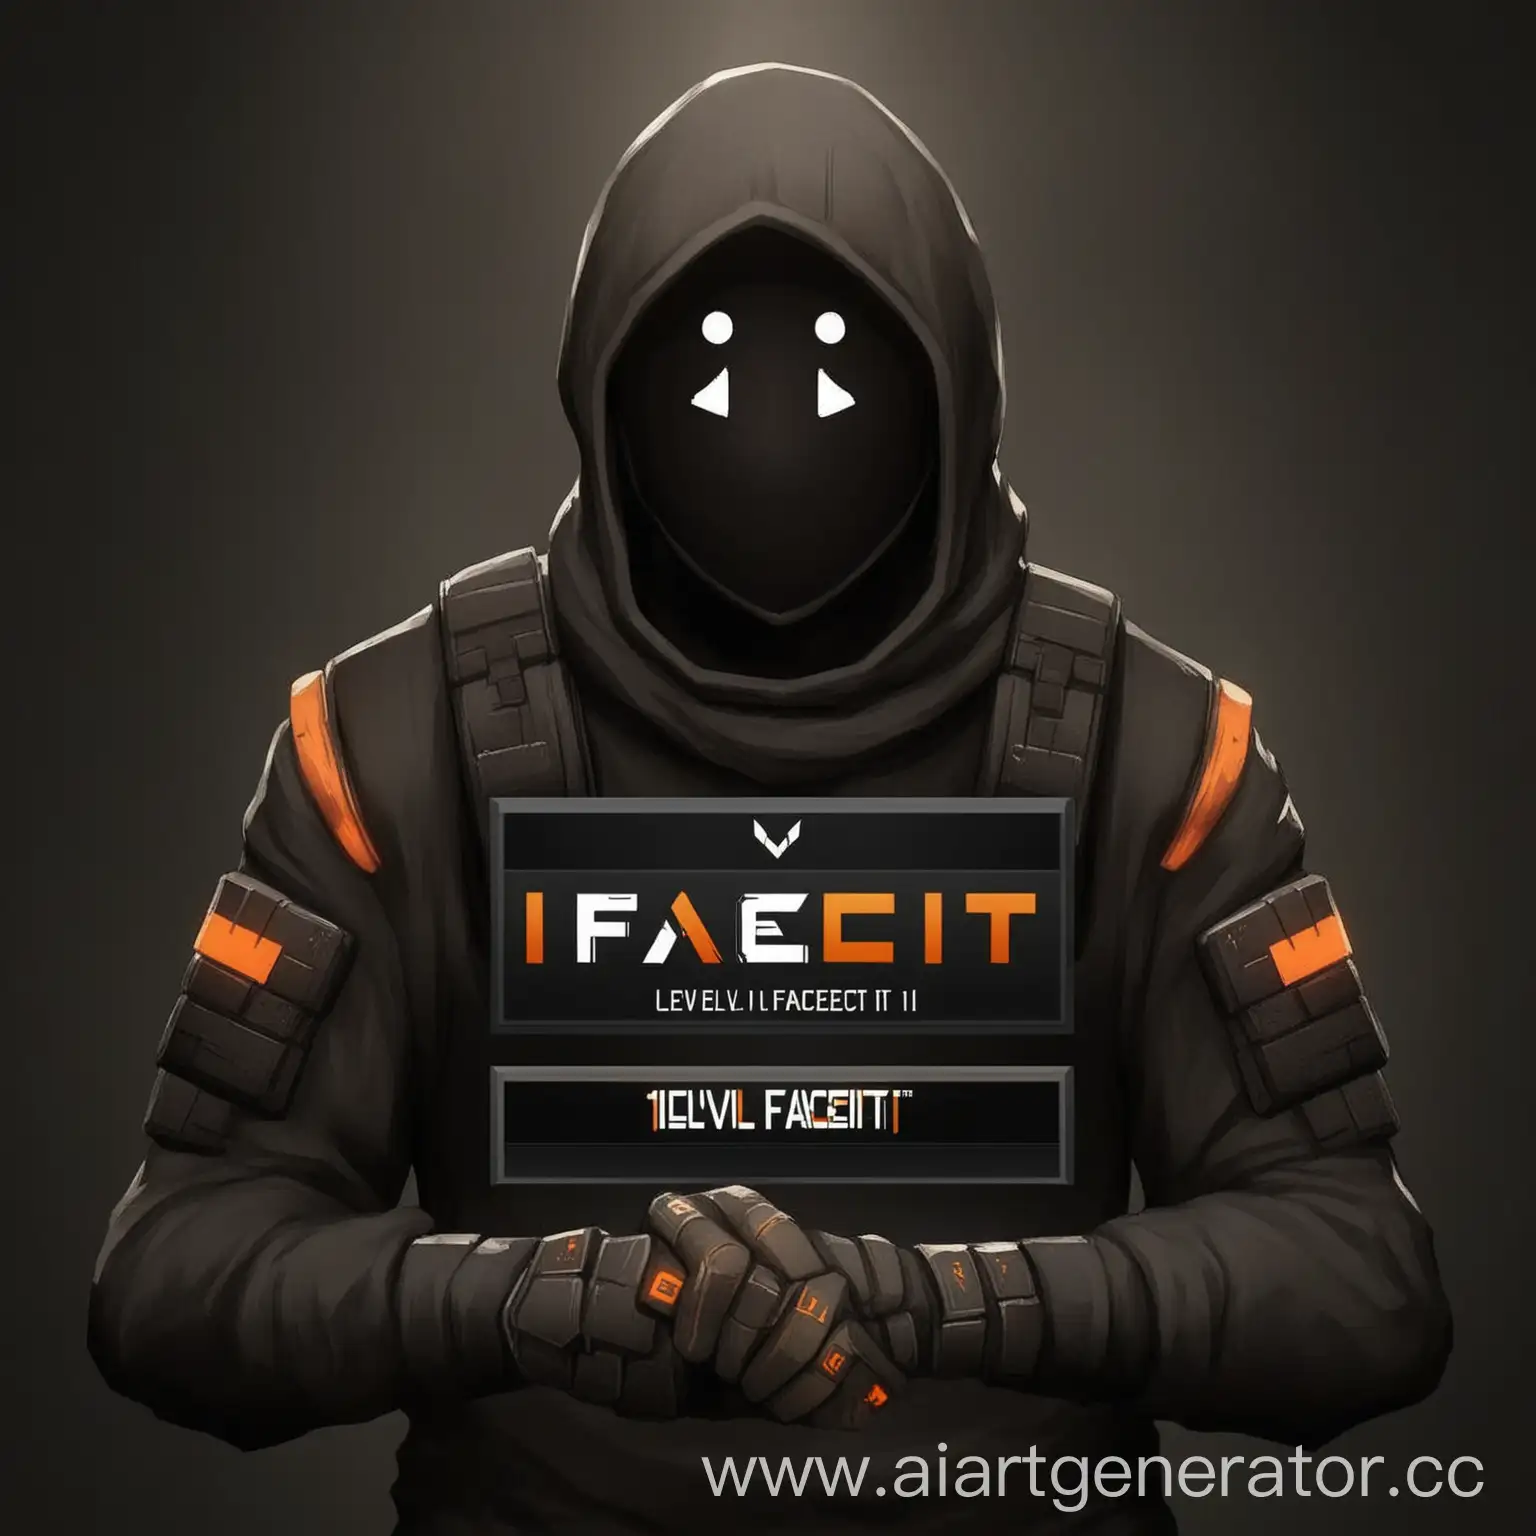 10 lvl FaceIt and I